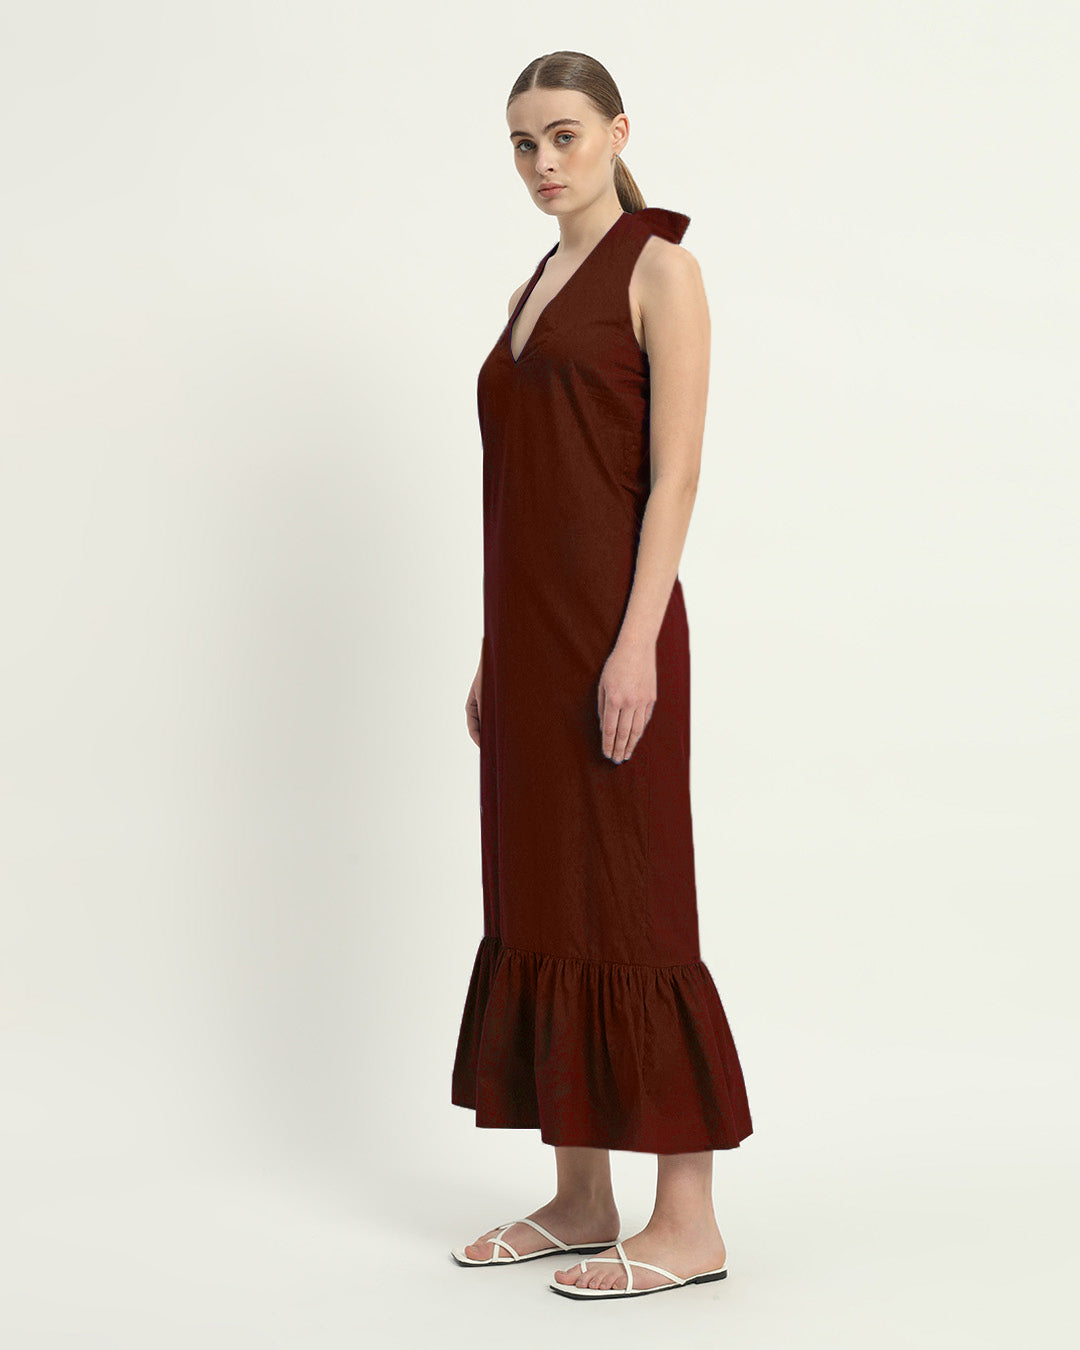 The Wellsville Rouge Cotton Dress